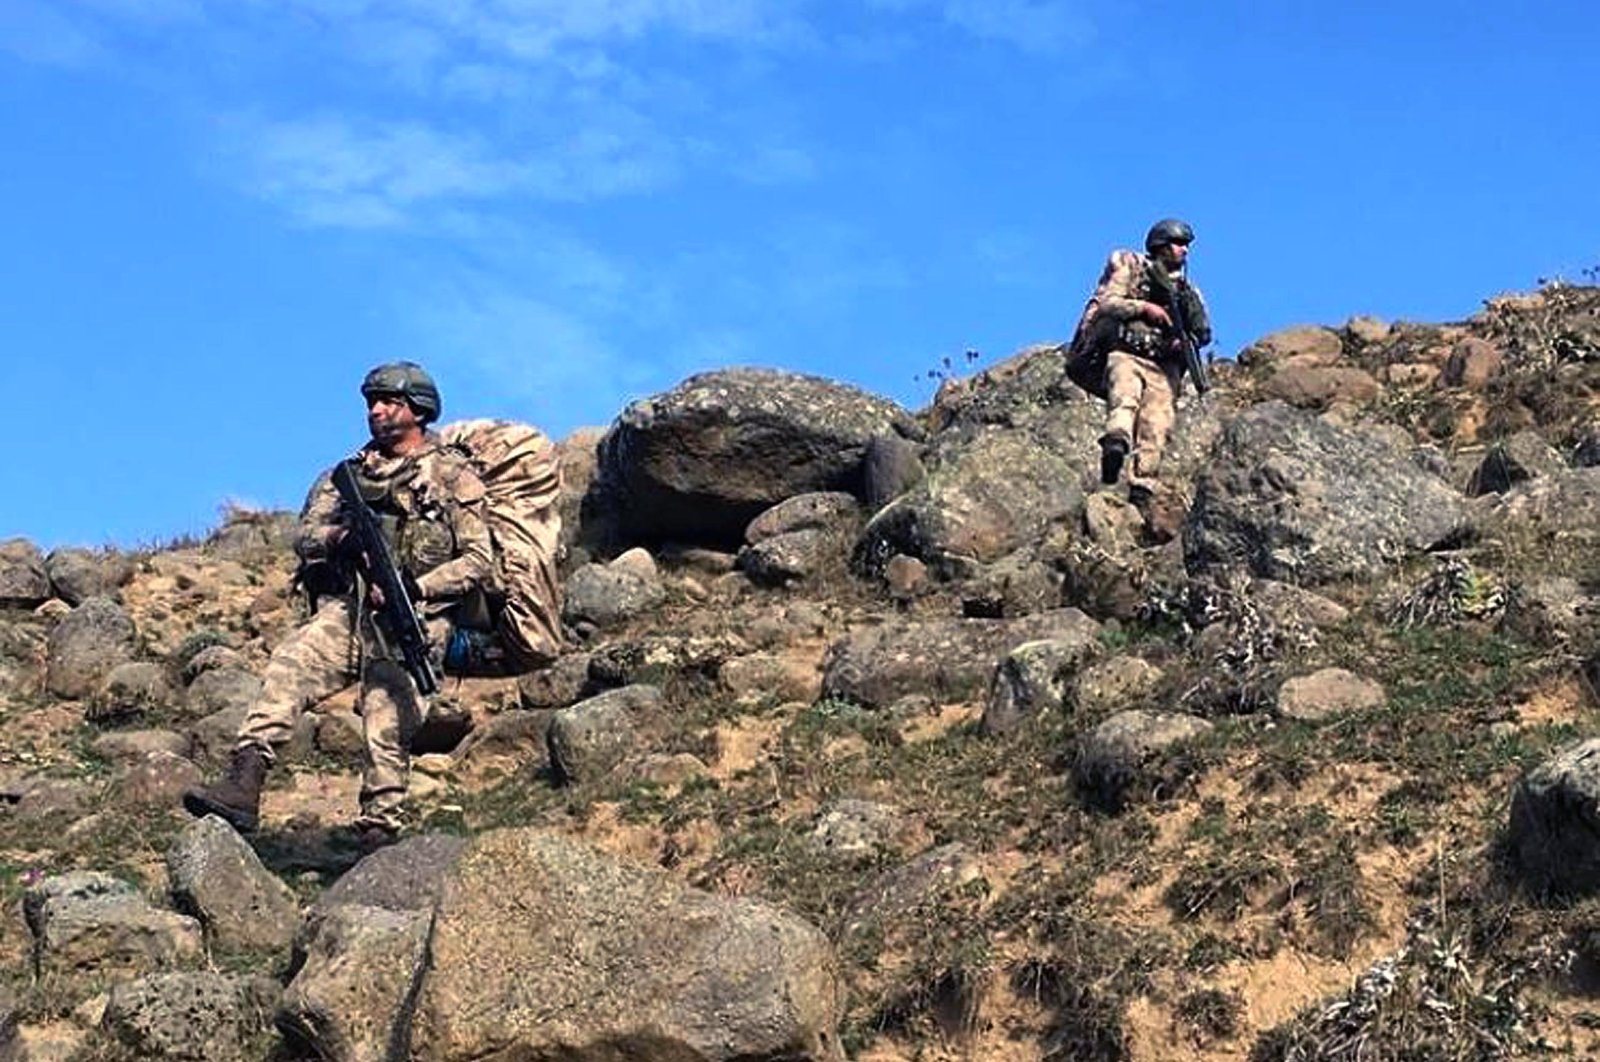 Turkish security forces regularly conduct counterterrorism operations in the eastern and southeastern provinces of Turkey where the PKK has attempted to establish a strong presence.